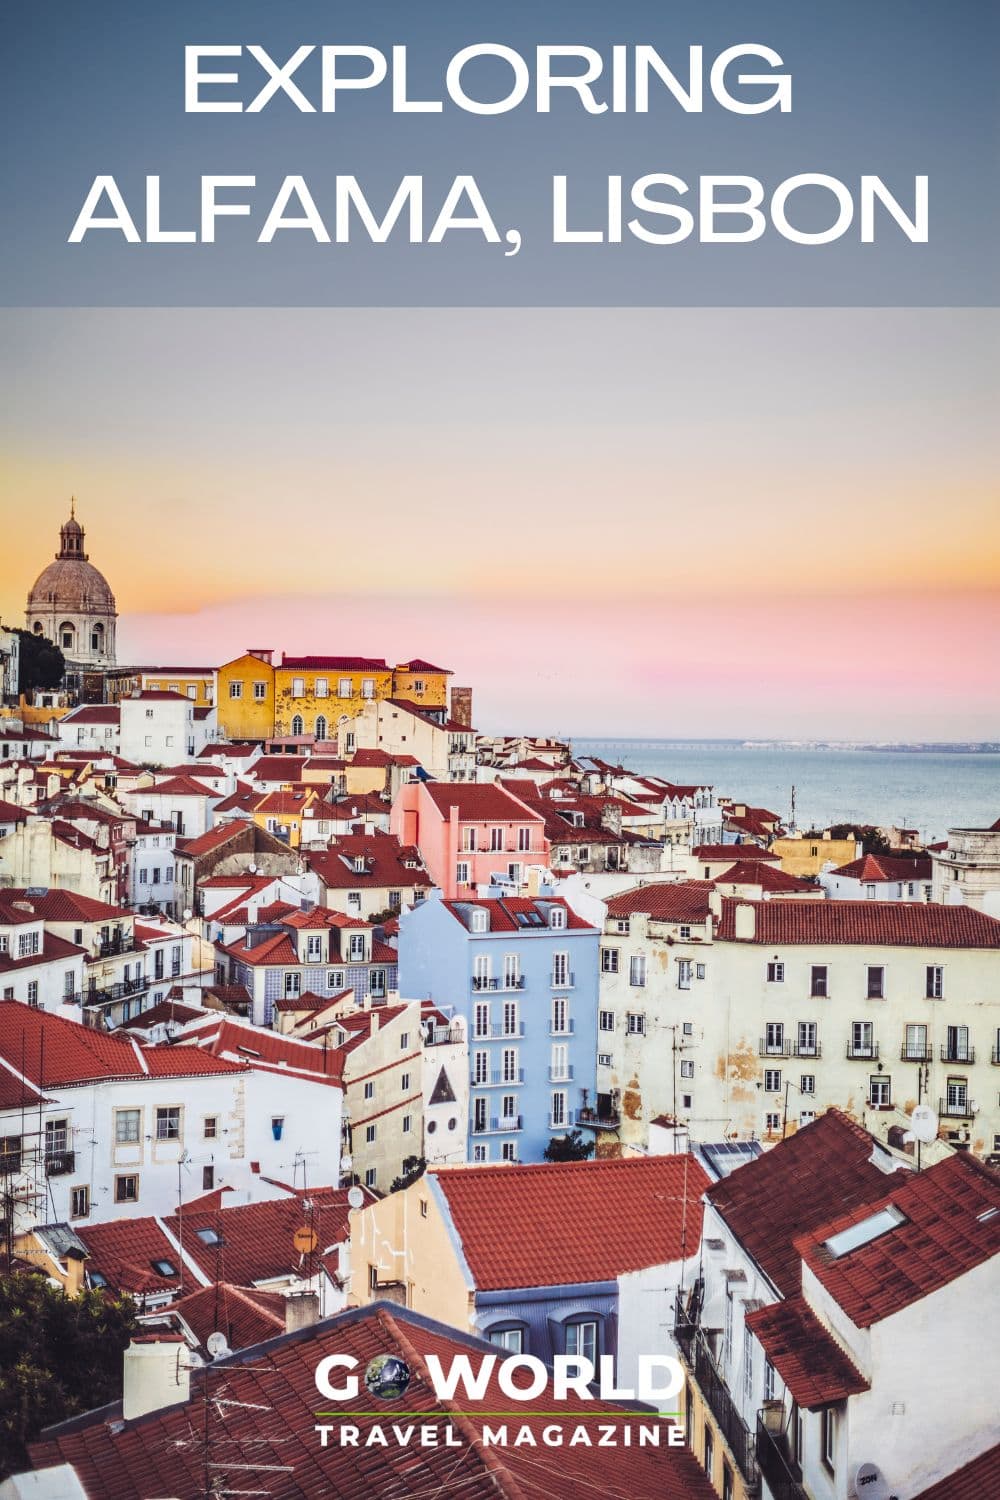 The neighborhood of Alfama, Lisbon is the oldest and most authentic in the city with winding cobblestone streets and charm on every corner. #Lisbon #Portugal